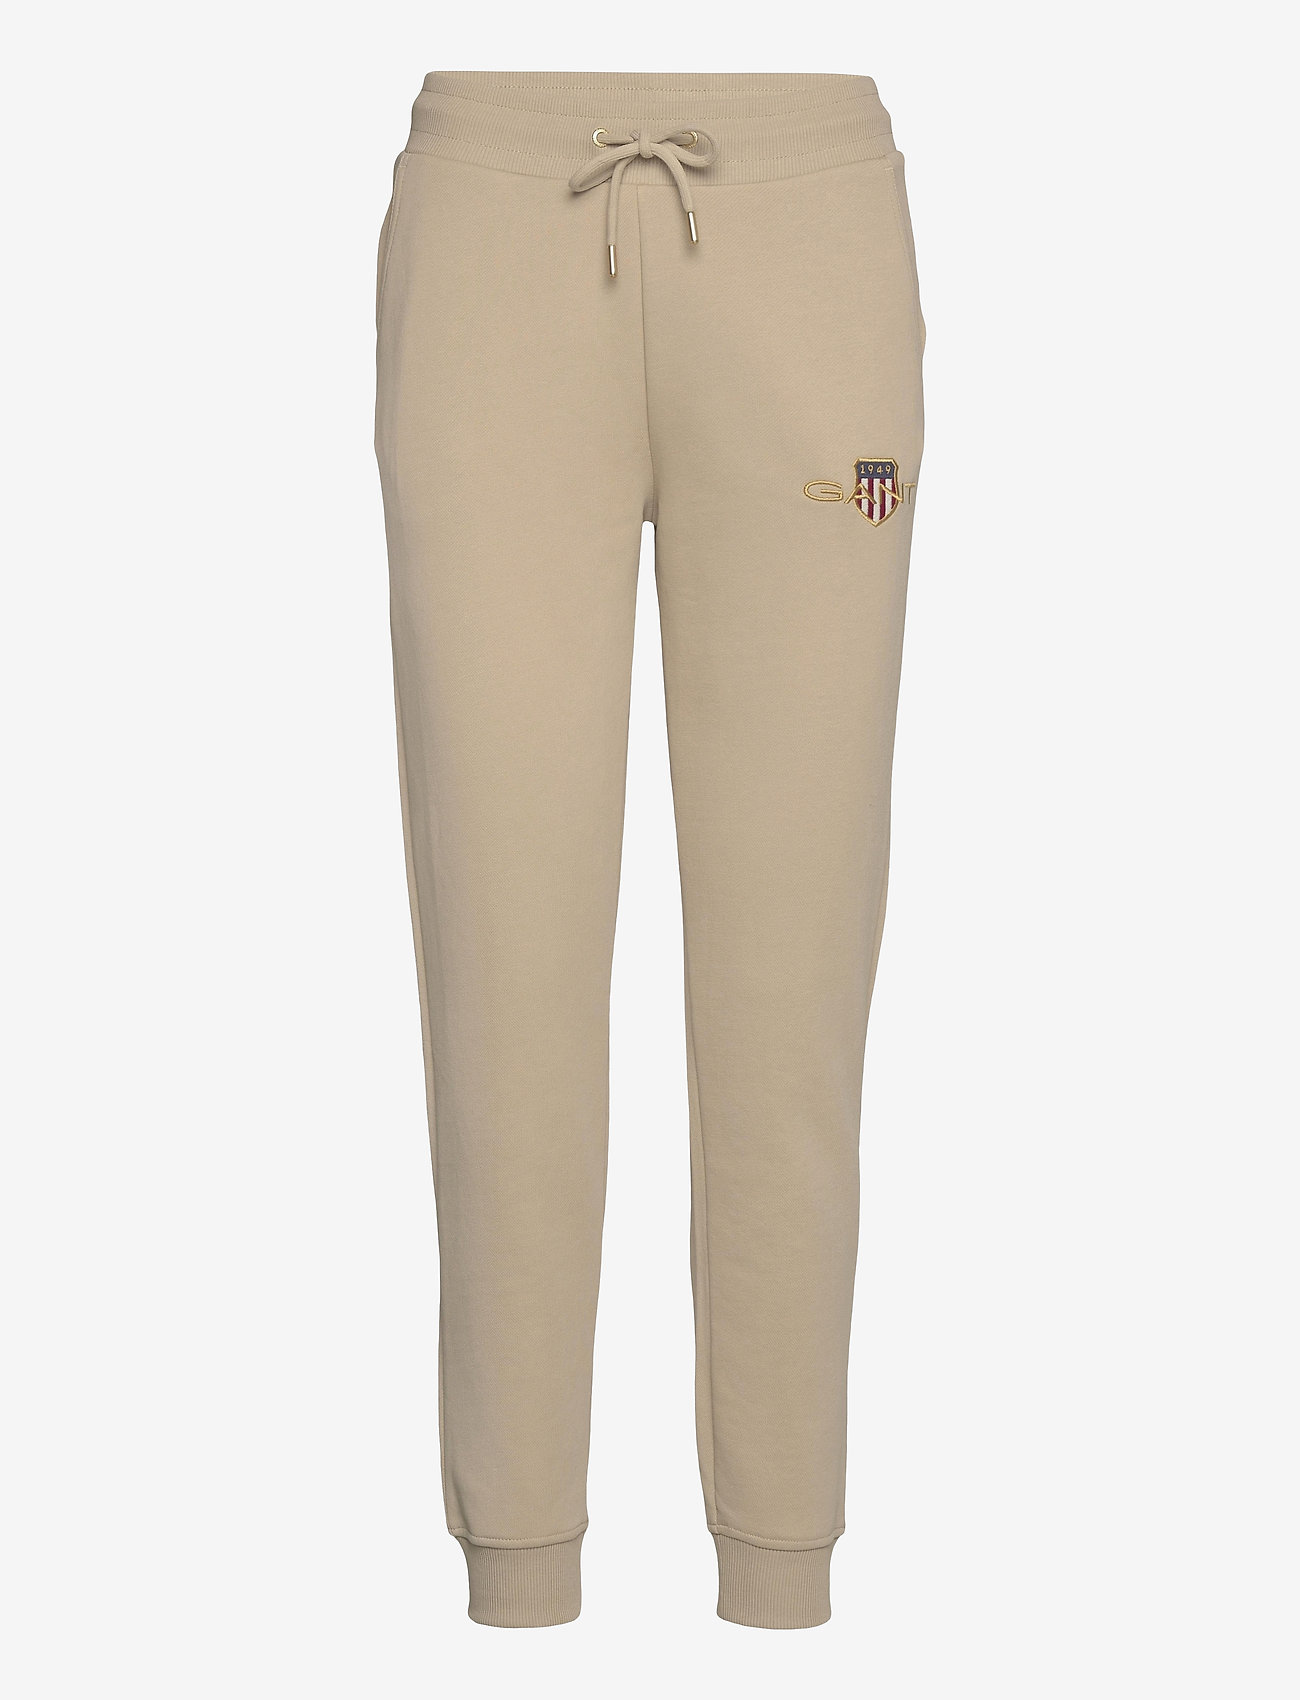 GANT - ARCHIVE SHIELD SWEAT PANT - nordic style - dry sand - 0